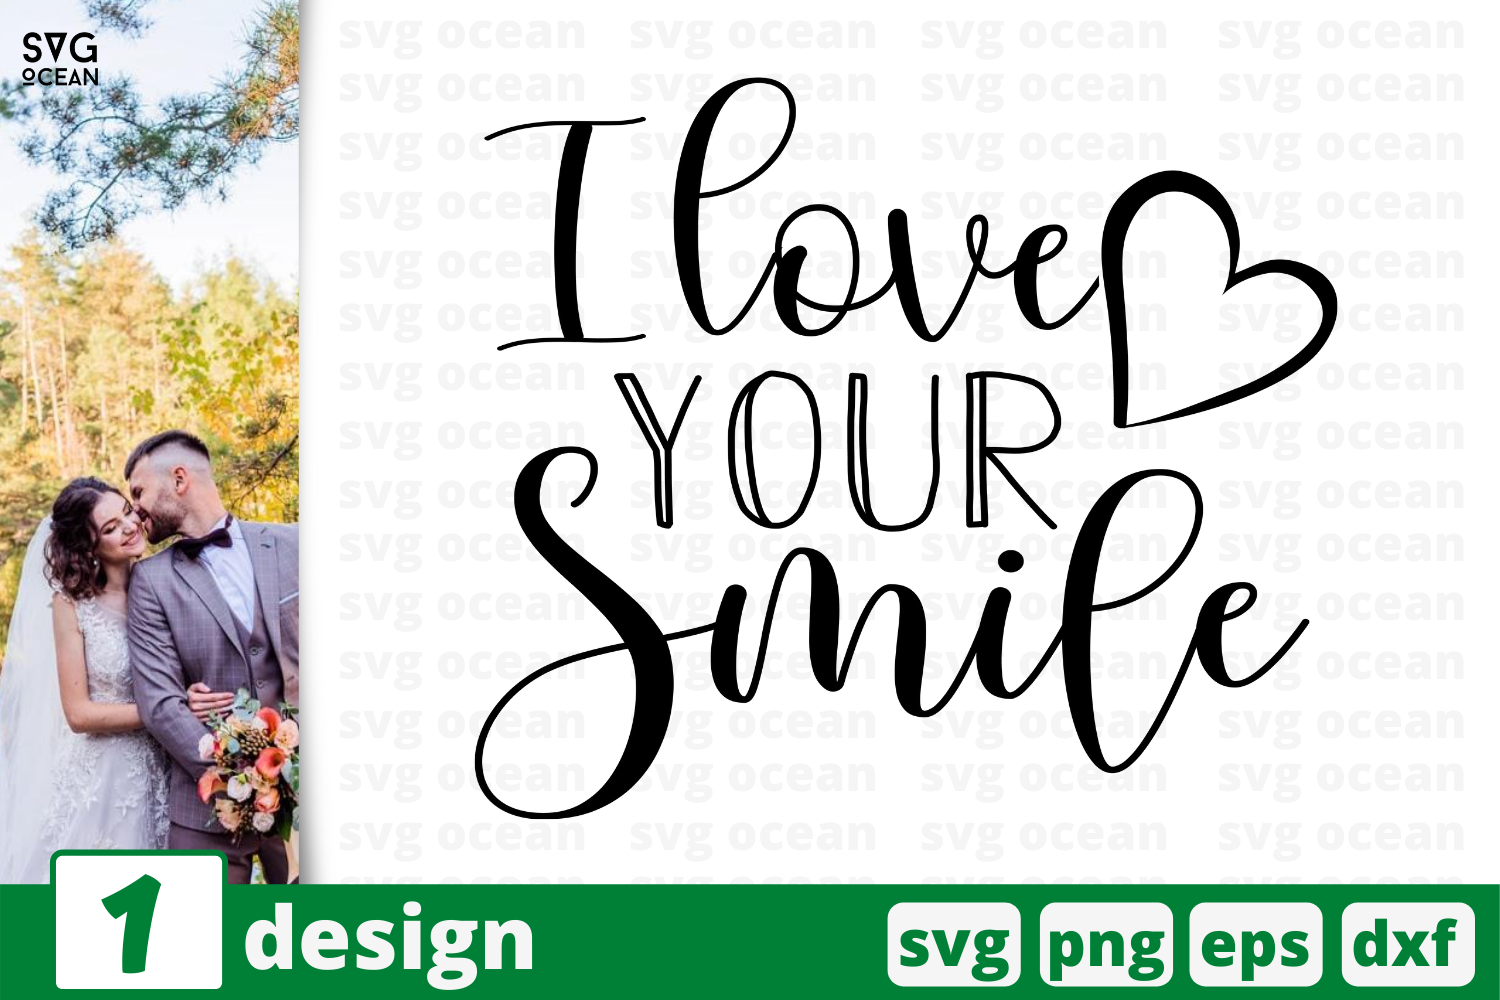 1 I Love Your Smile Wedding Quotes Cricut Svg By Svgocean Thehungryjpeg Com